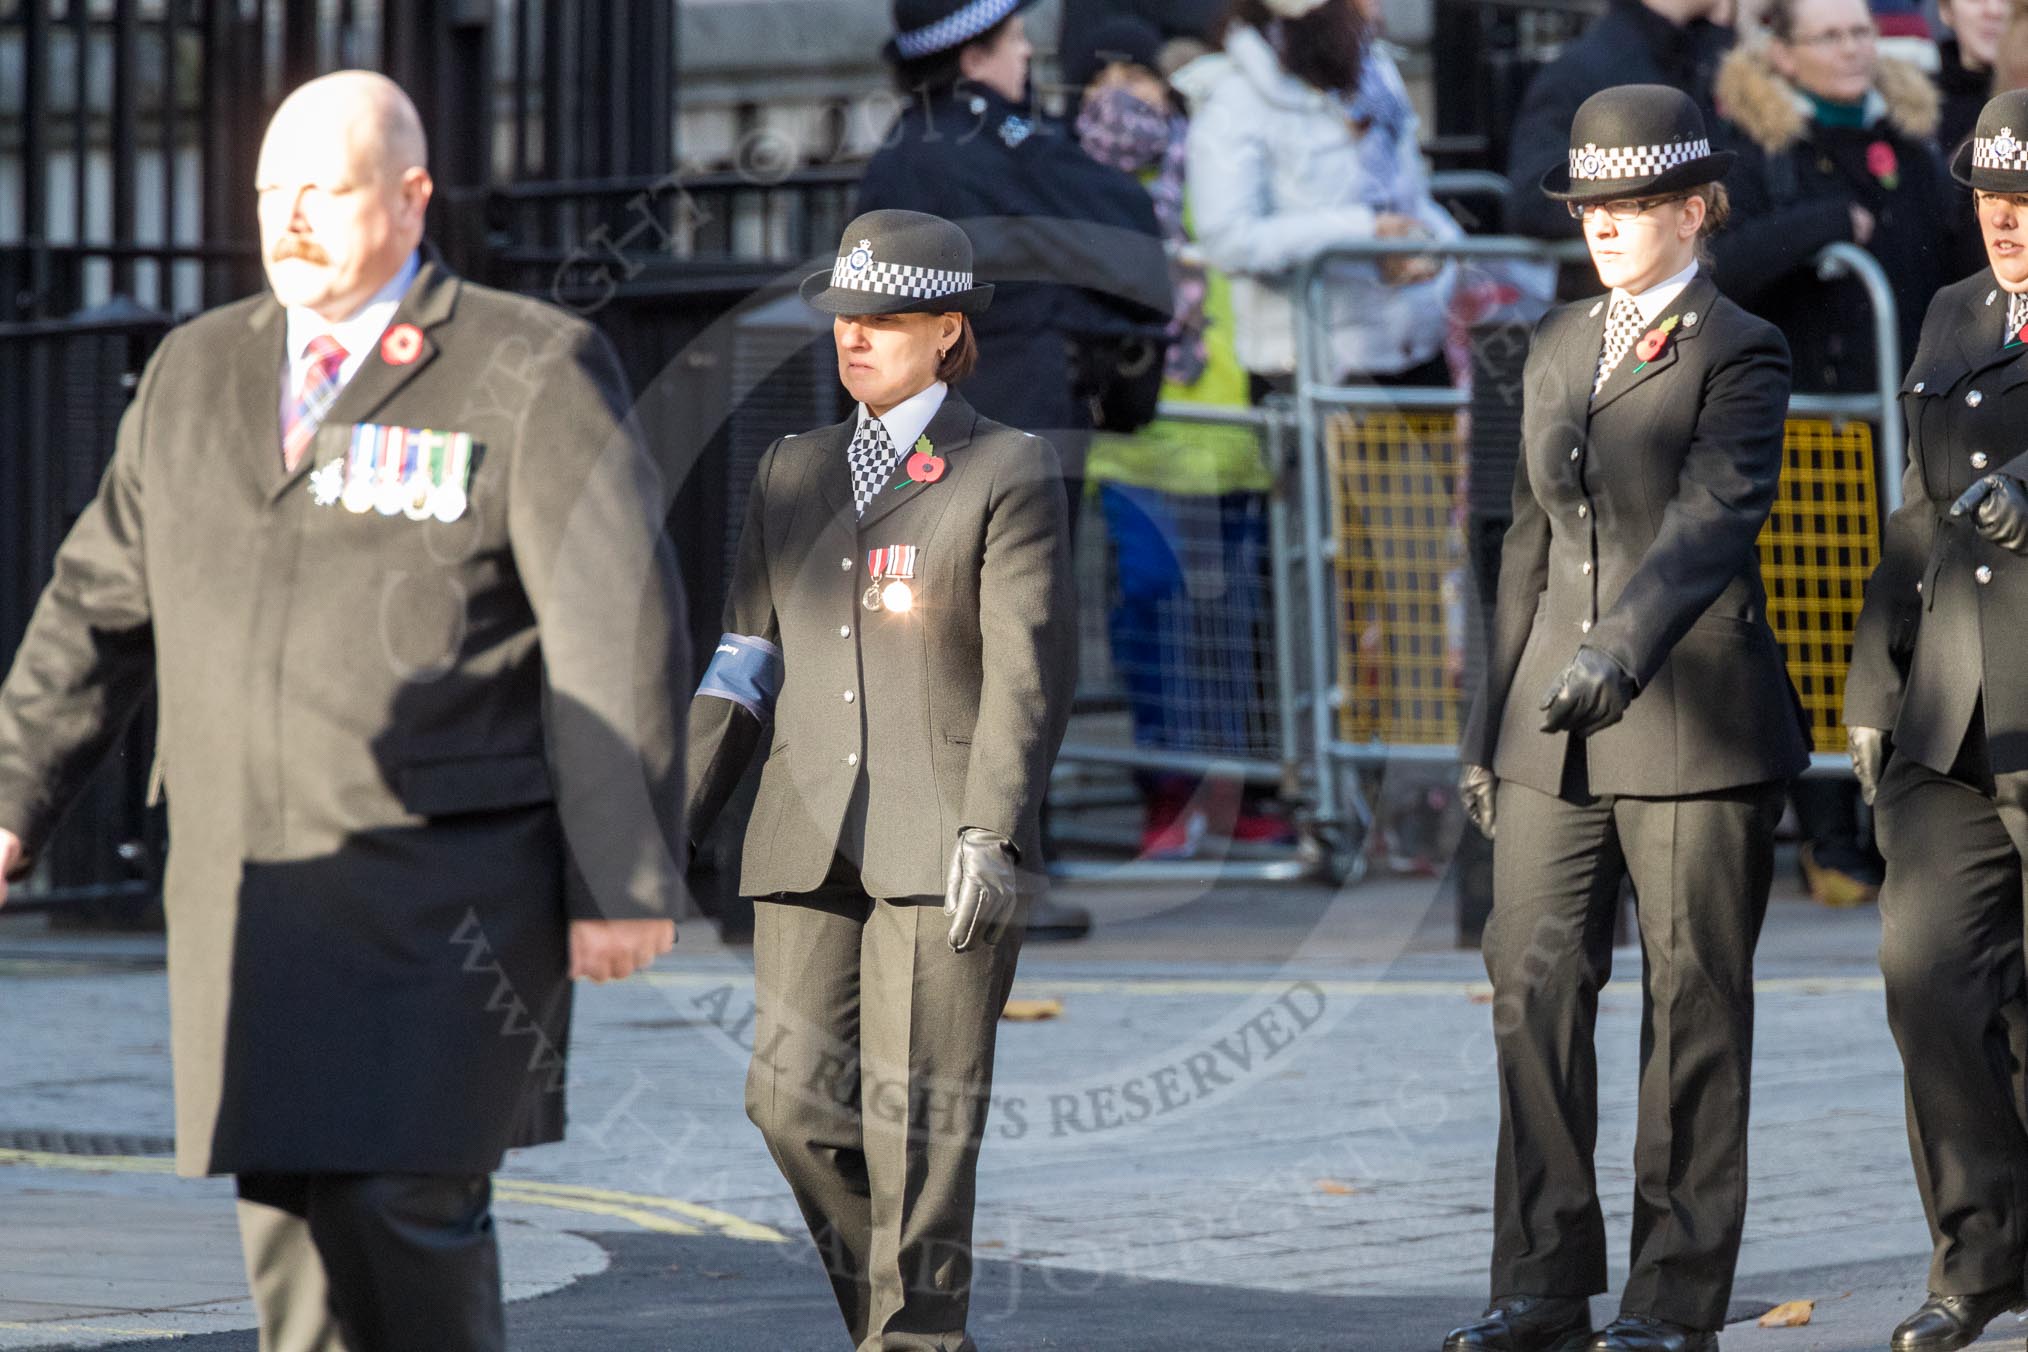 March Past, Remembrance Sunday at the Cenotaph 2016: M38 Cheshire Special Constabulary.
Cenotaph, Whitehall, London SW1,
London,
Greater London,
United Kingdom,
on 13 November 2016 at 13:19, image #2914